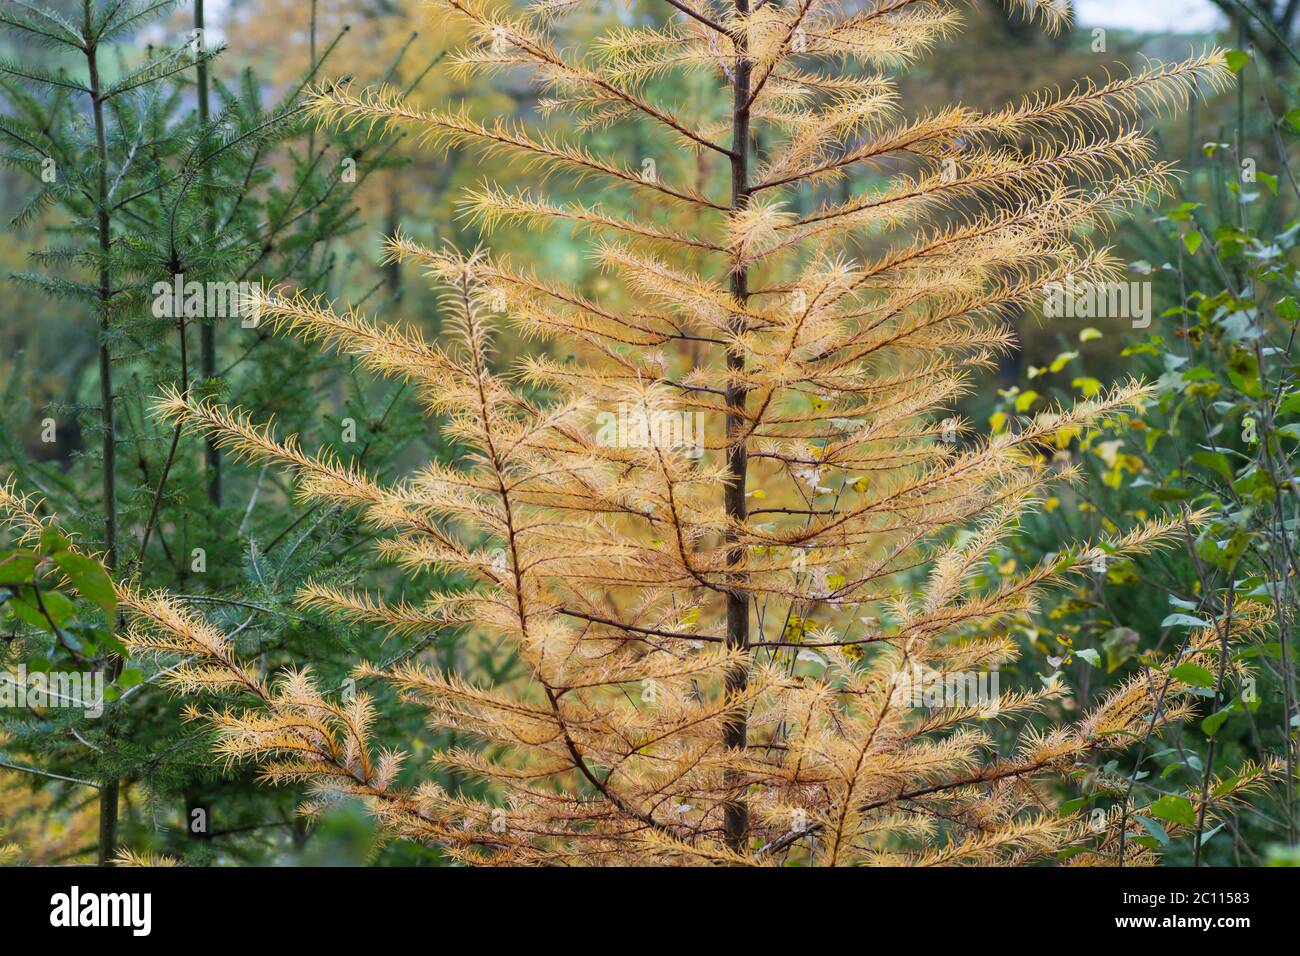 Detail of larch trees deciduous foliage in autumn Stock Photo